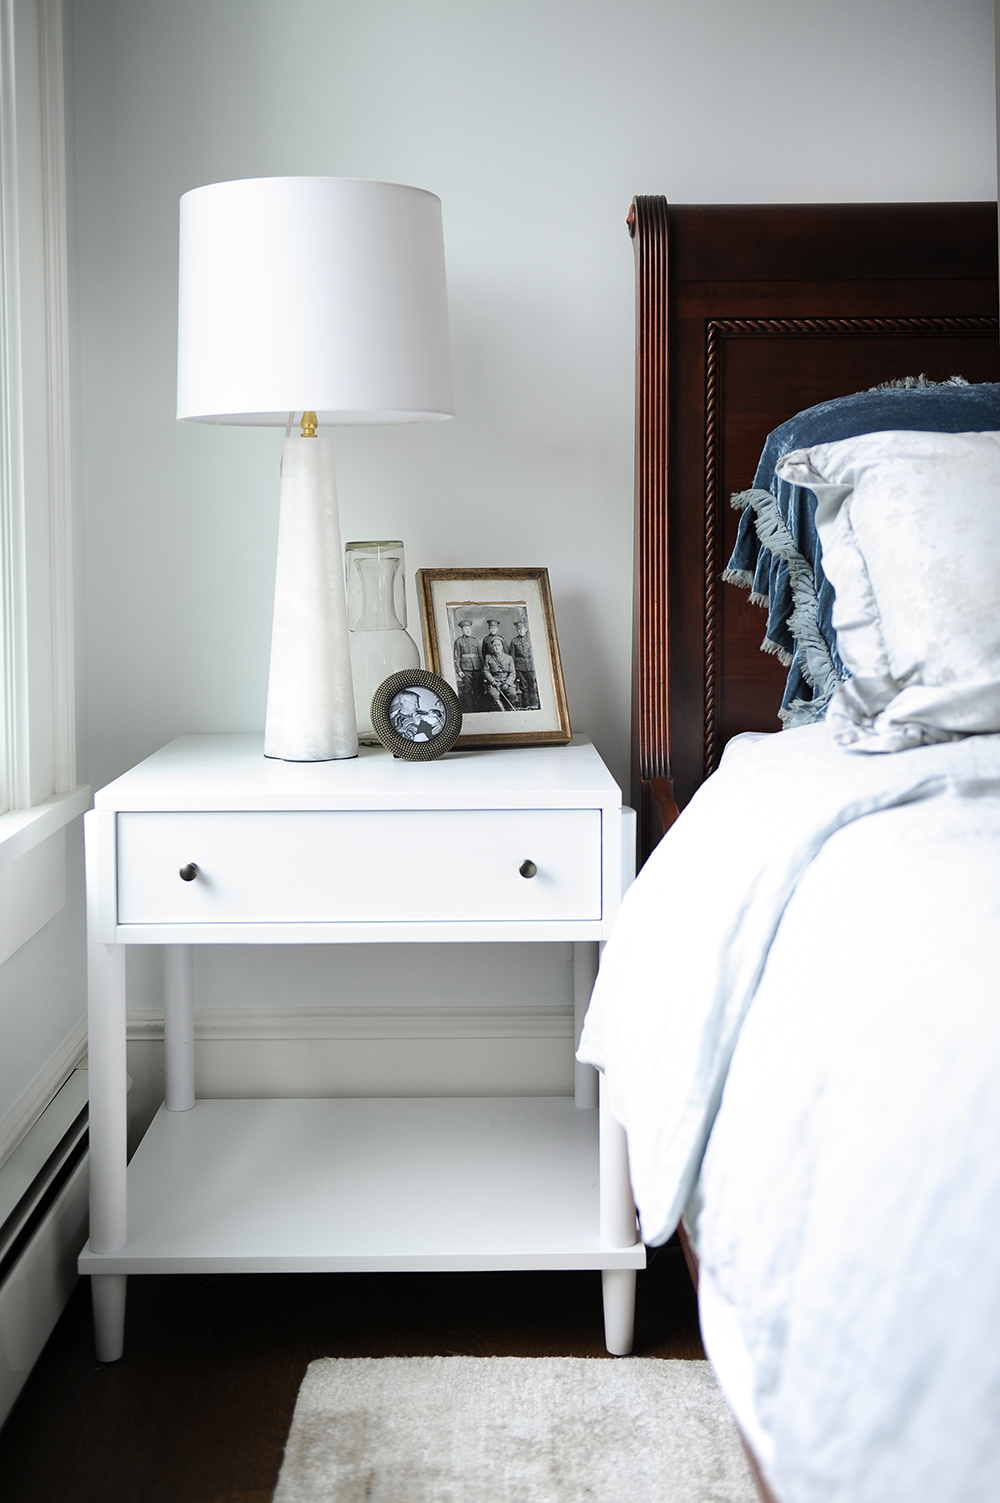 The designers contrasted the owners' wooden bed with white nightstands.